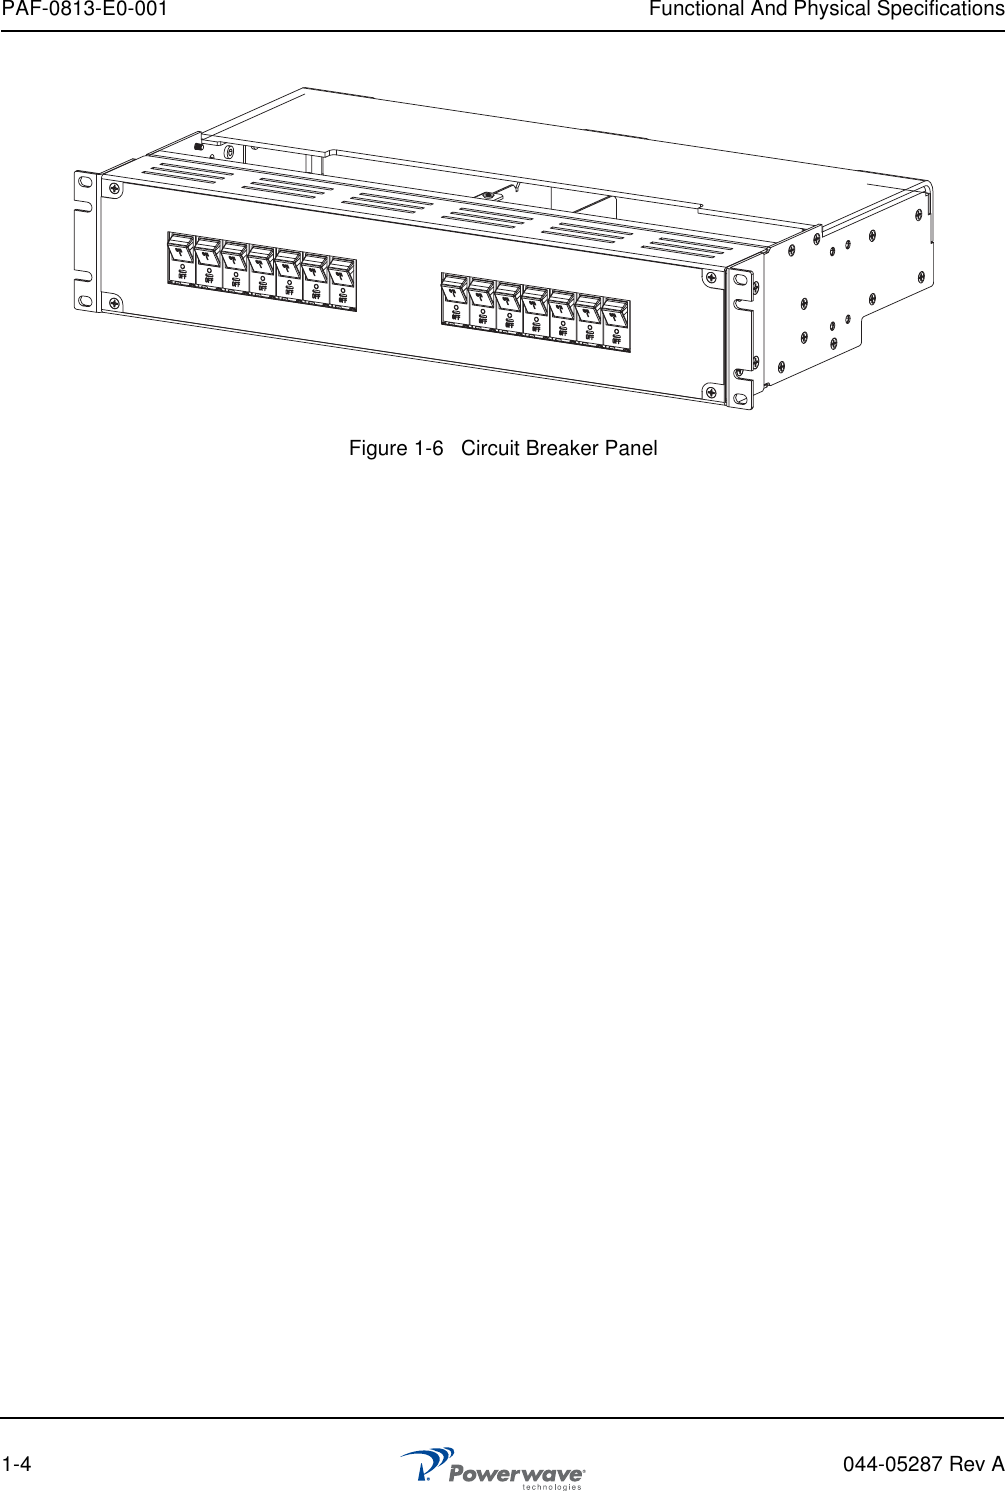 PAF-0813-E0-001 Functional And Physical Specifications1-4 044-05287 Rev AFigure 1-6   Circuit Breaker Panel 